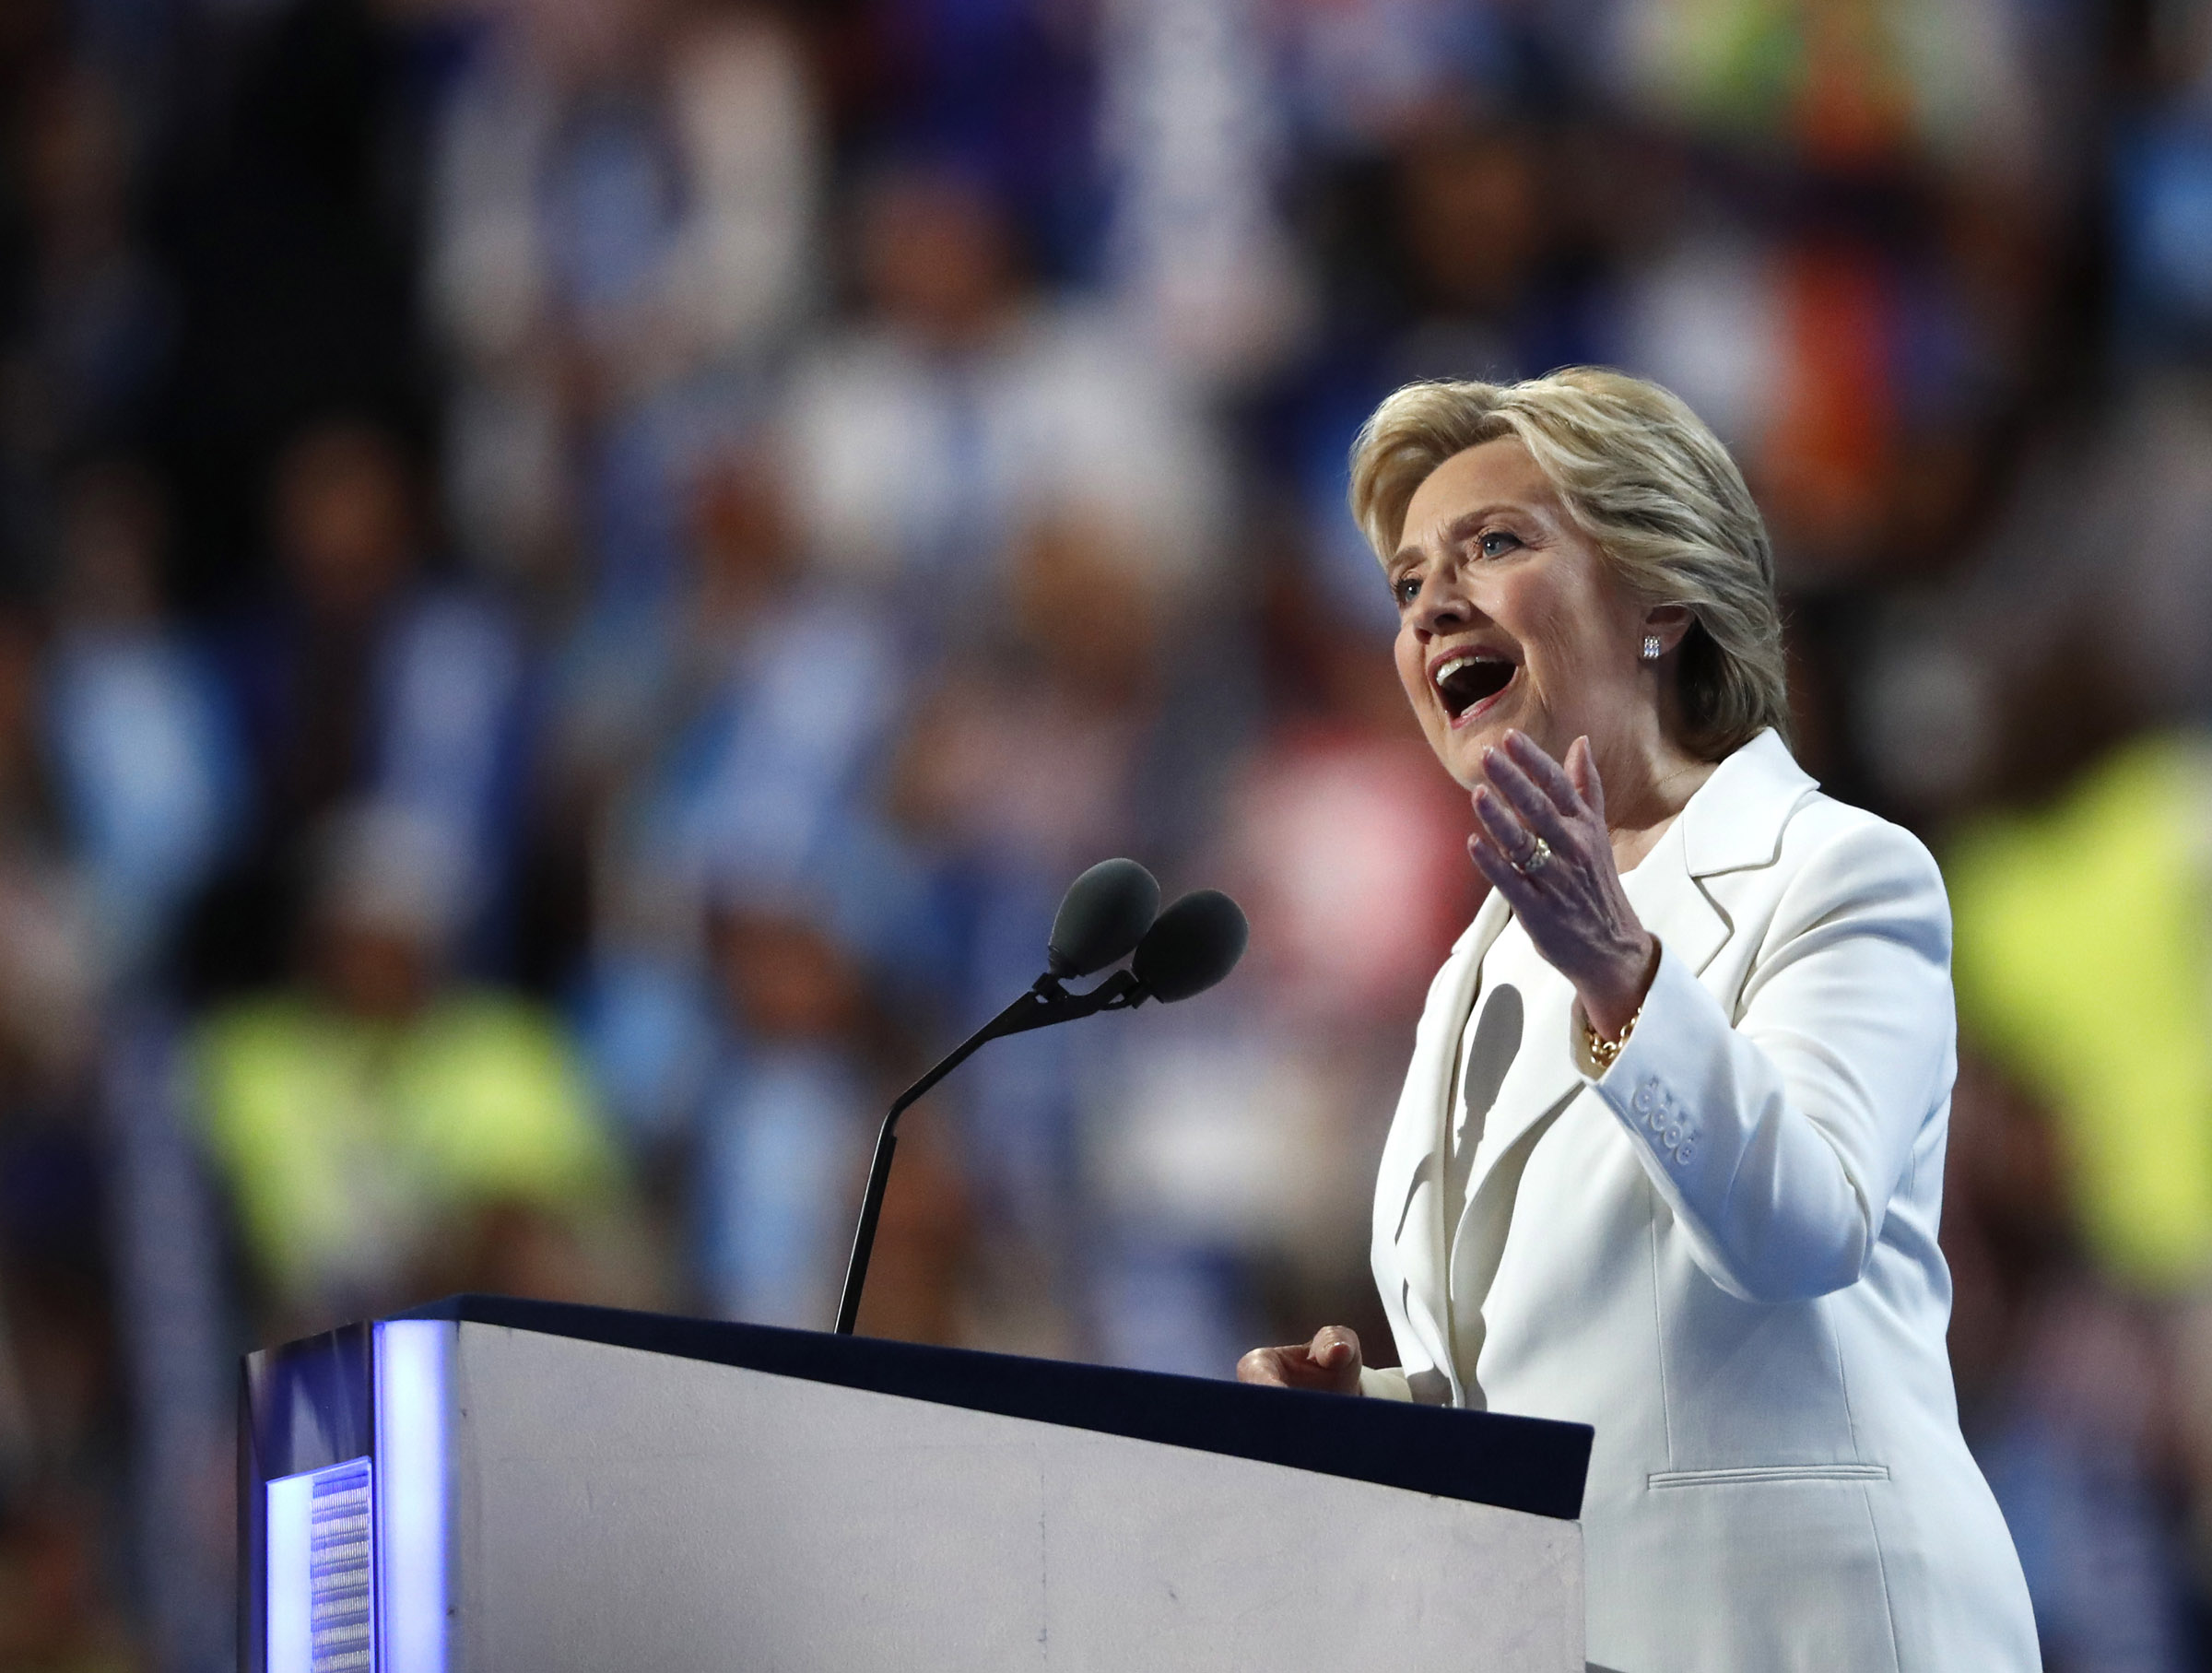 Hillary Clinton accepts Democratic party nomination at Philly convention